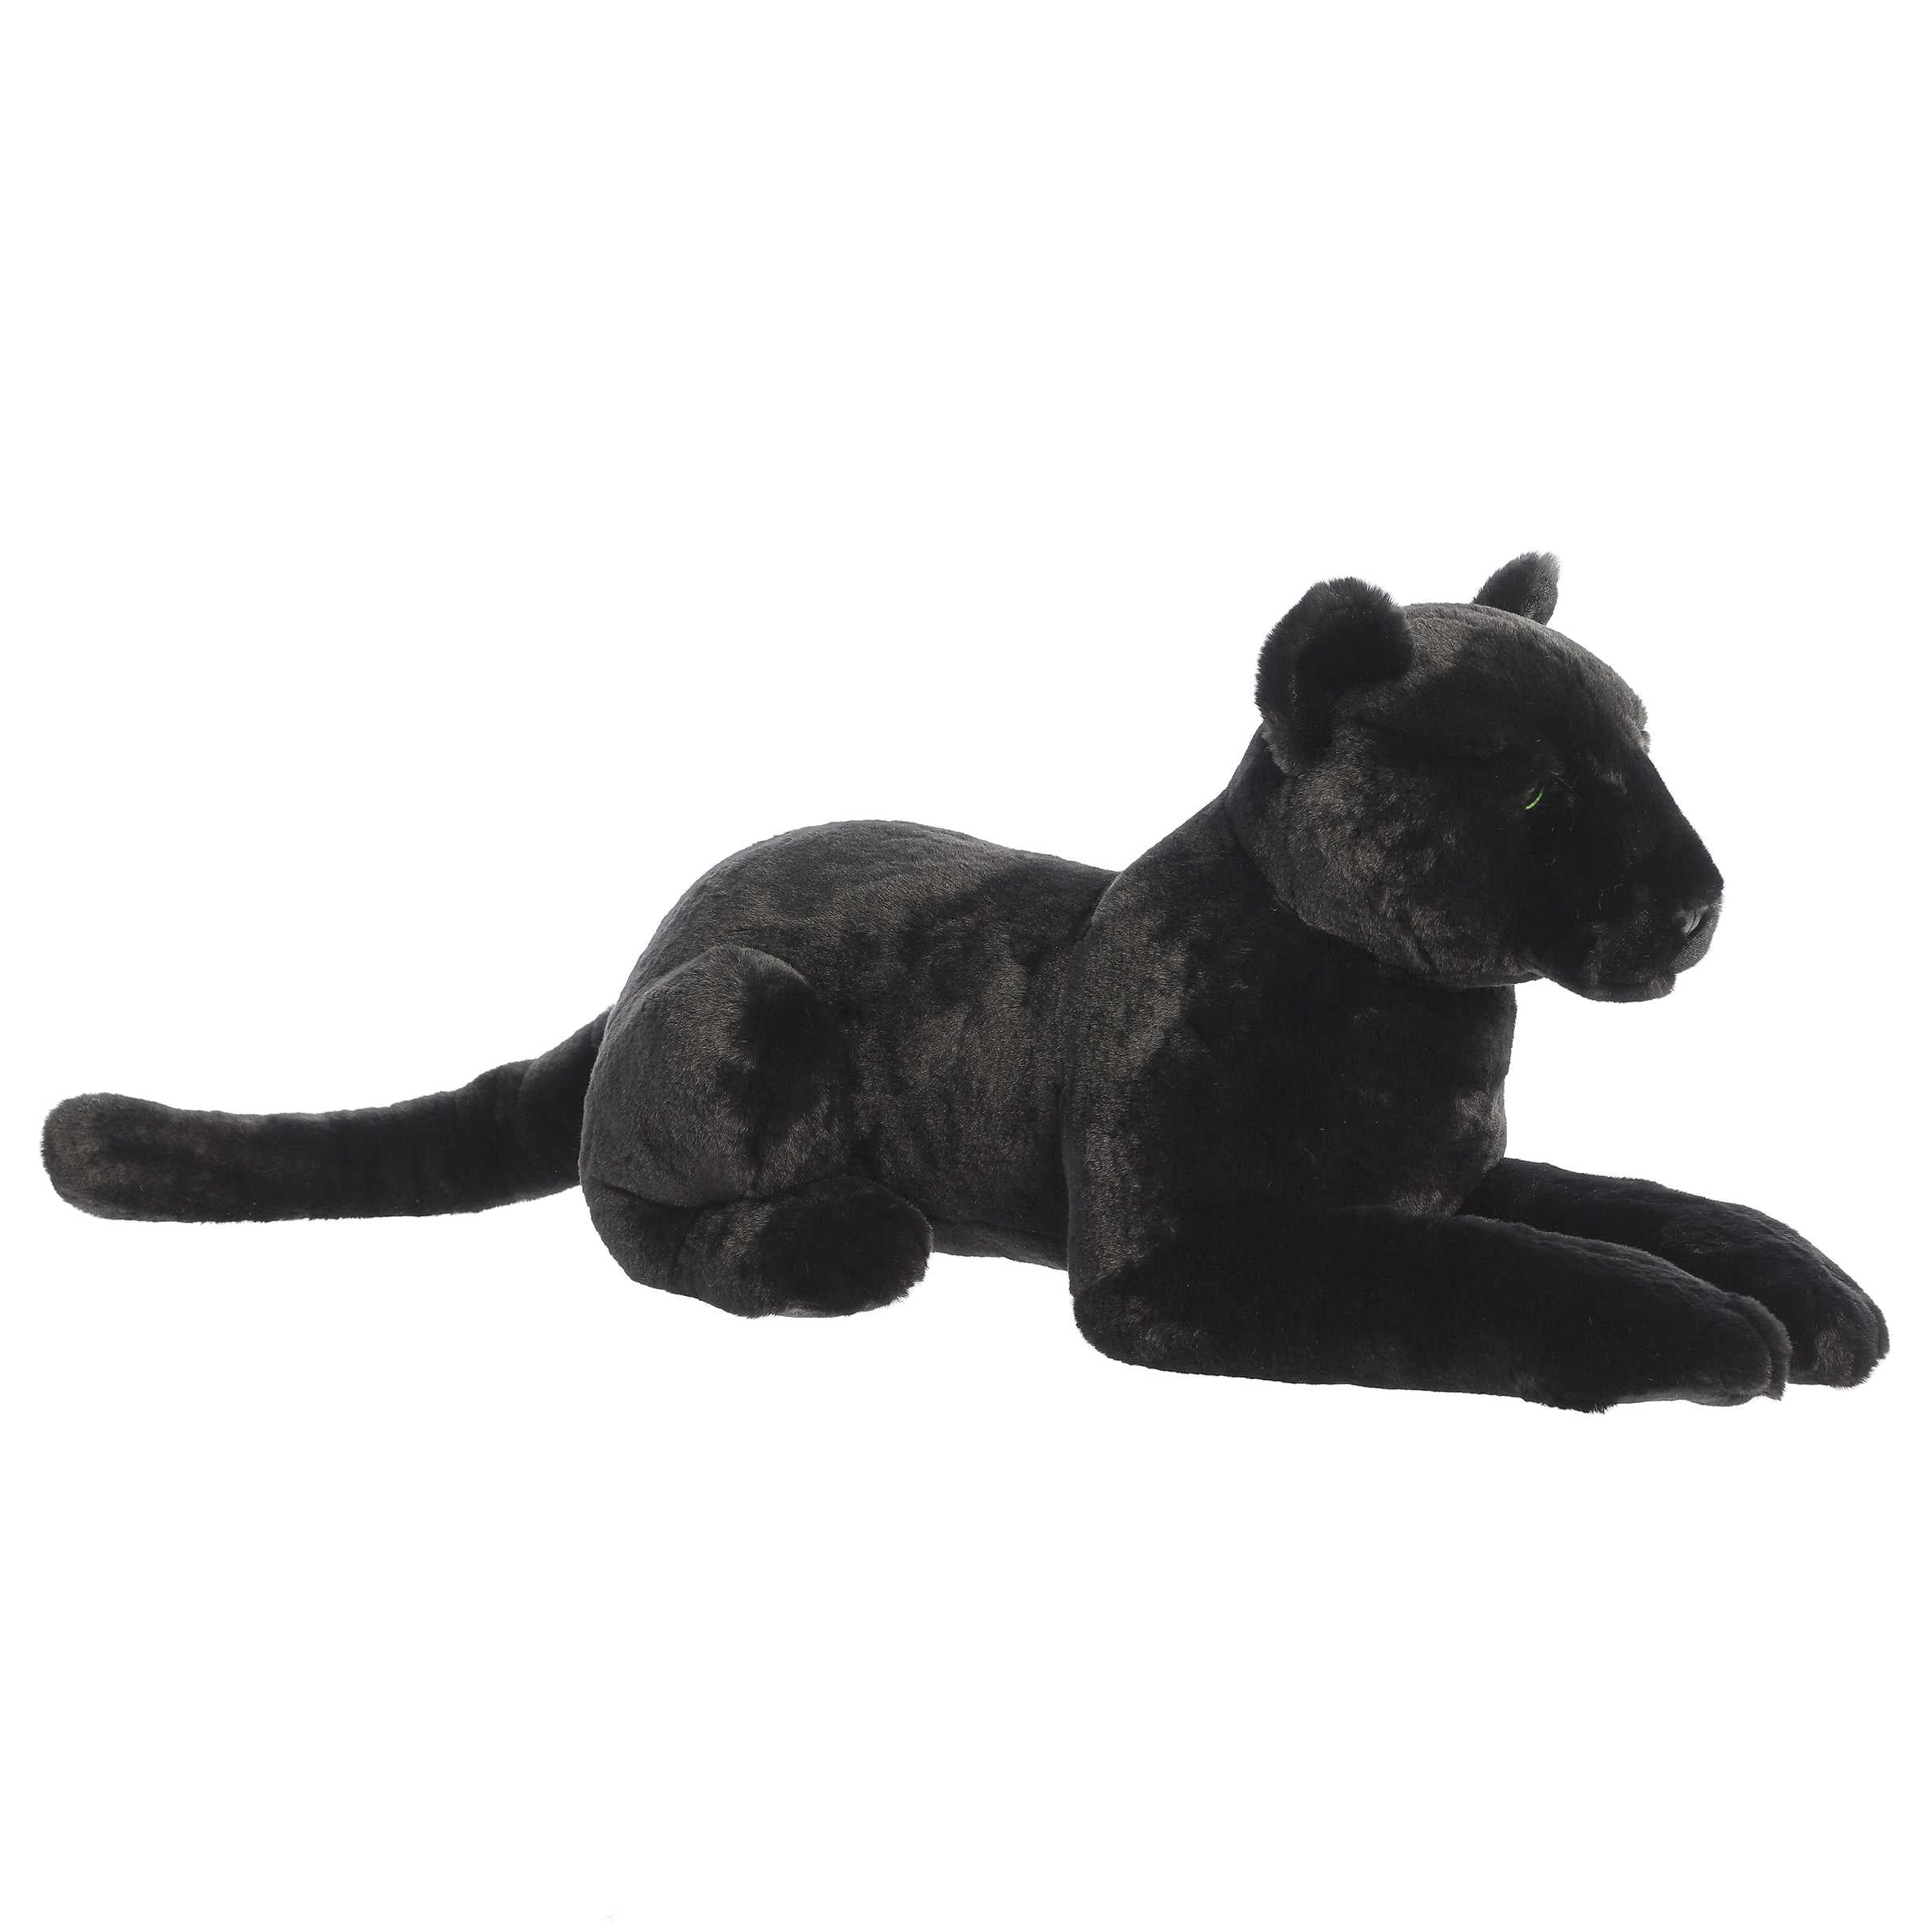 Lifelike black panther plush with piercing green eyes and muscular form, part of the Super Flopsie collection, by Aurora.